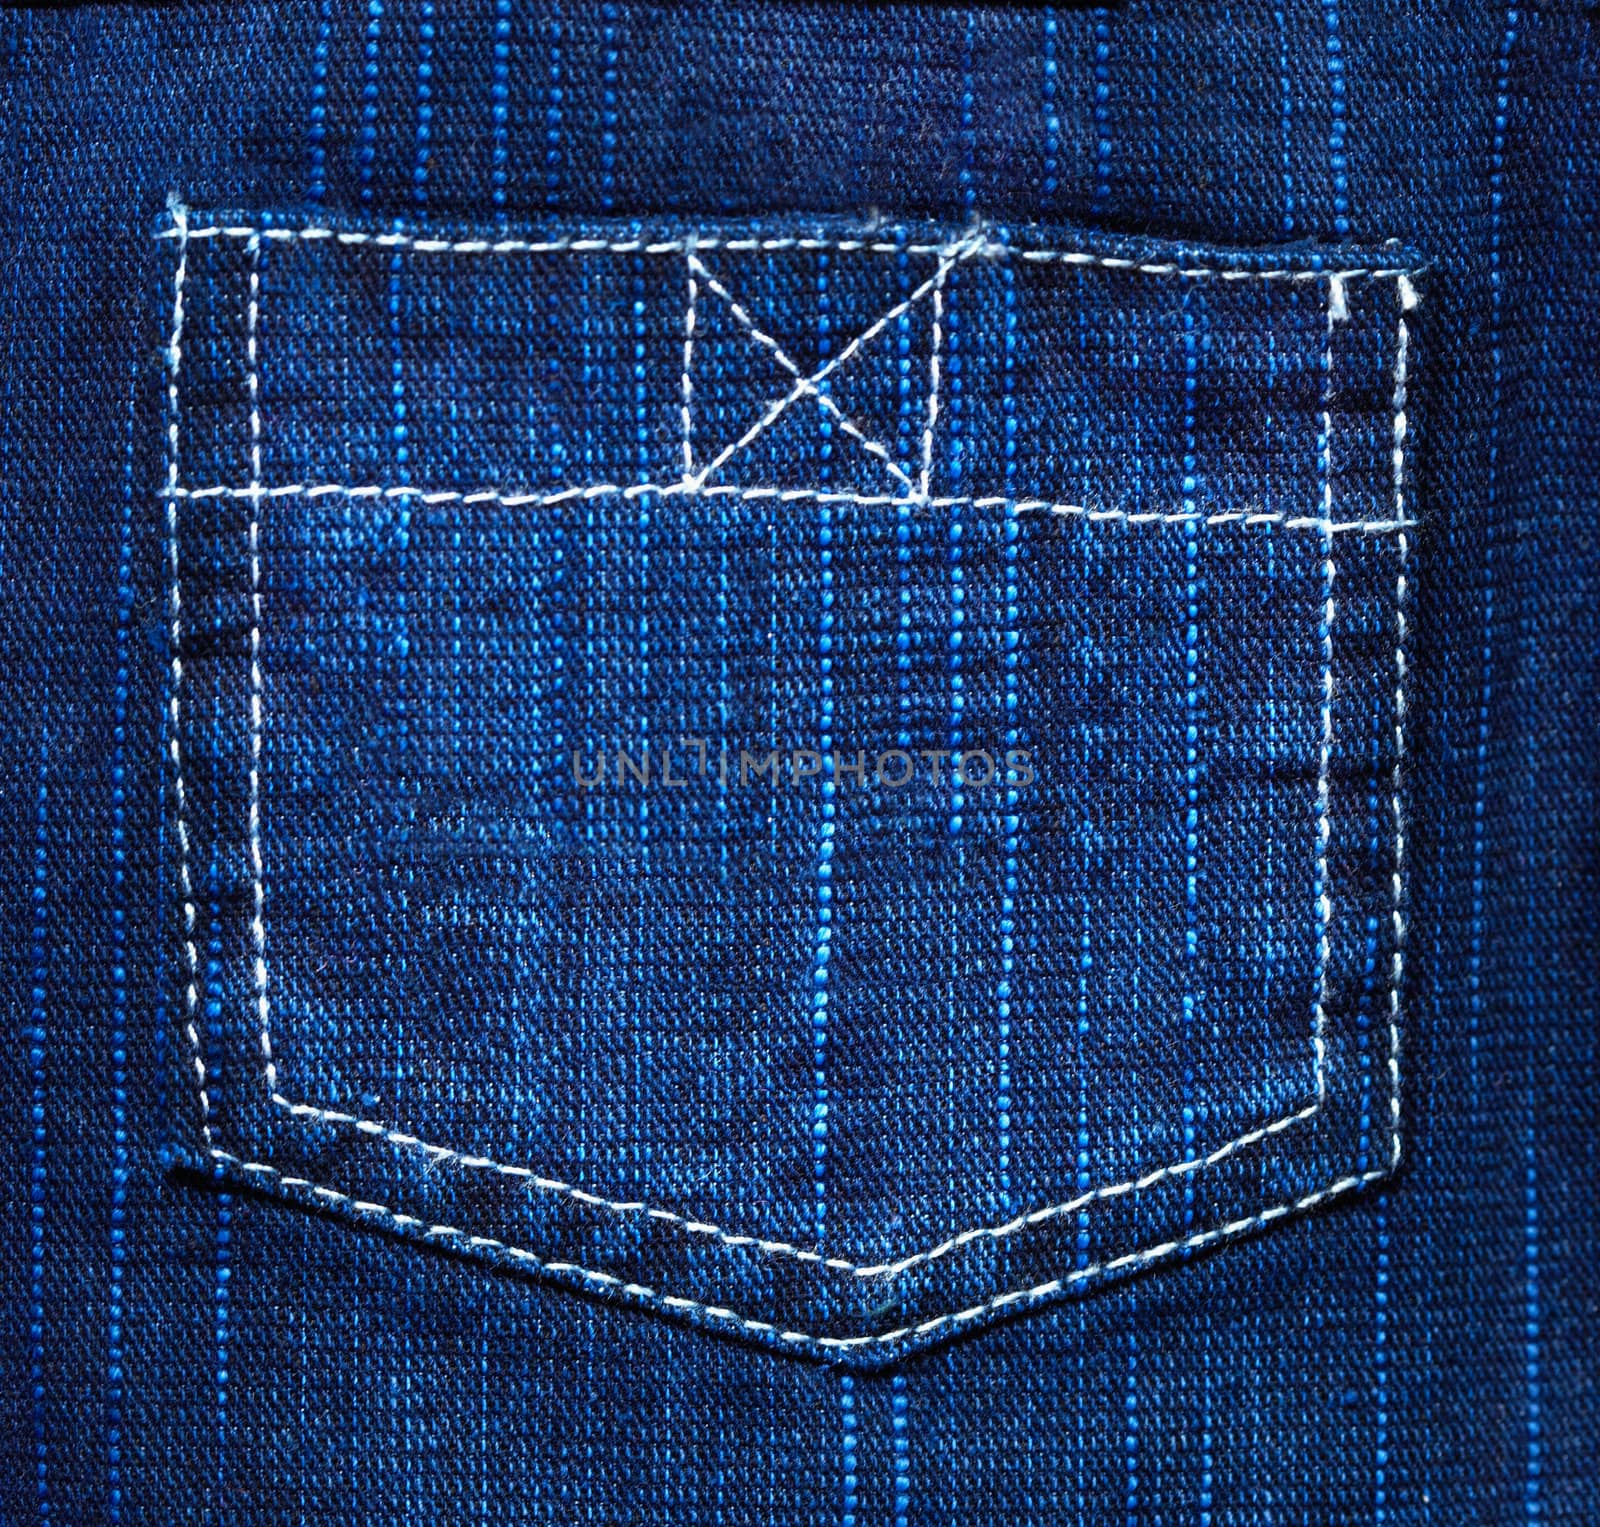 Back pocket of jeans by pzaxe